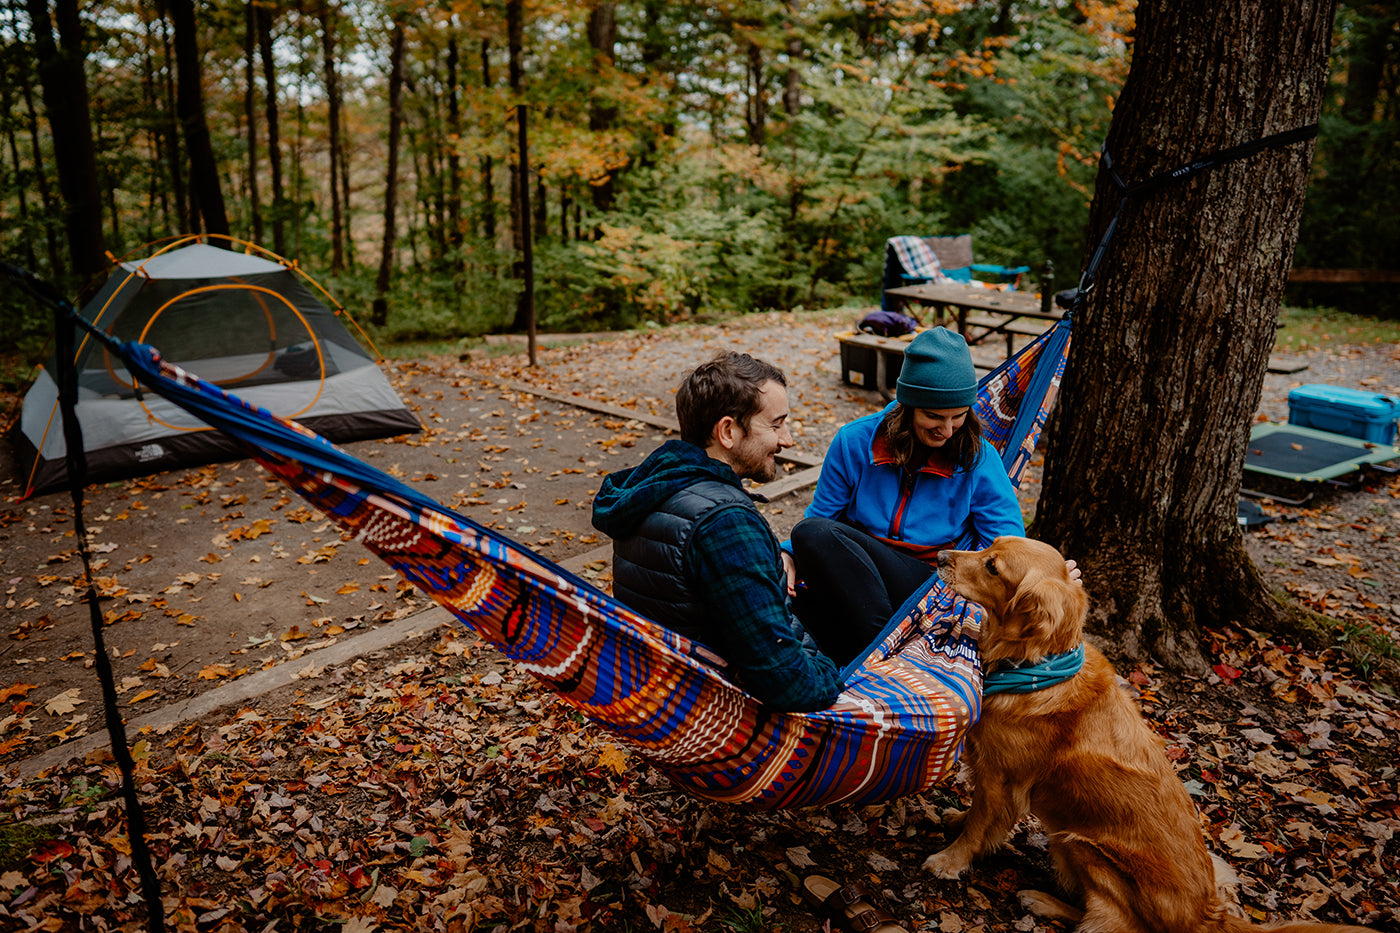 6 Things to Make Camp More Comfortable